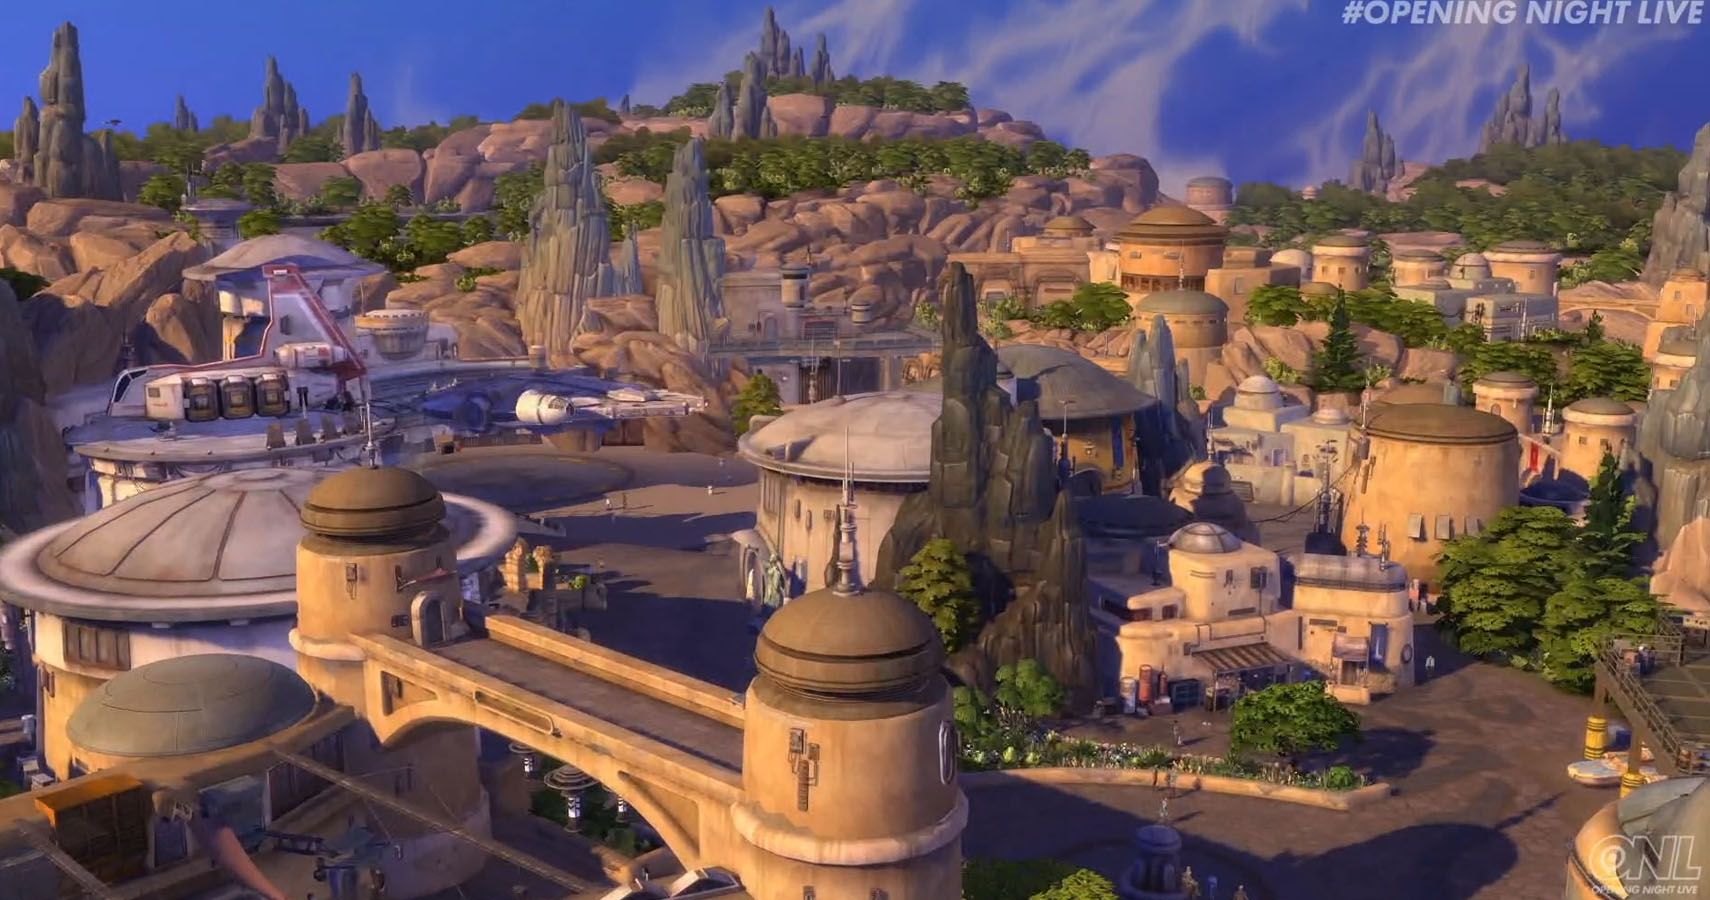 The Sims 4 Journeys To Batuu In Upcoming Star Wars Game Pack